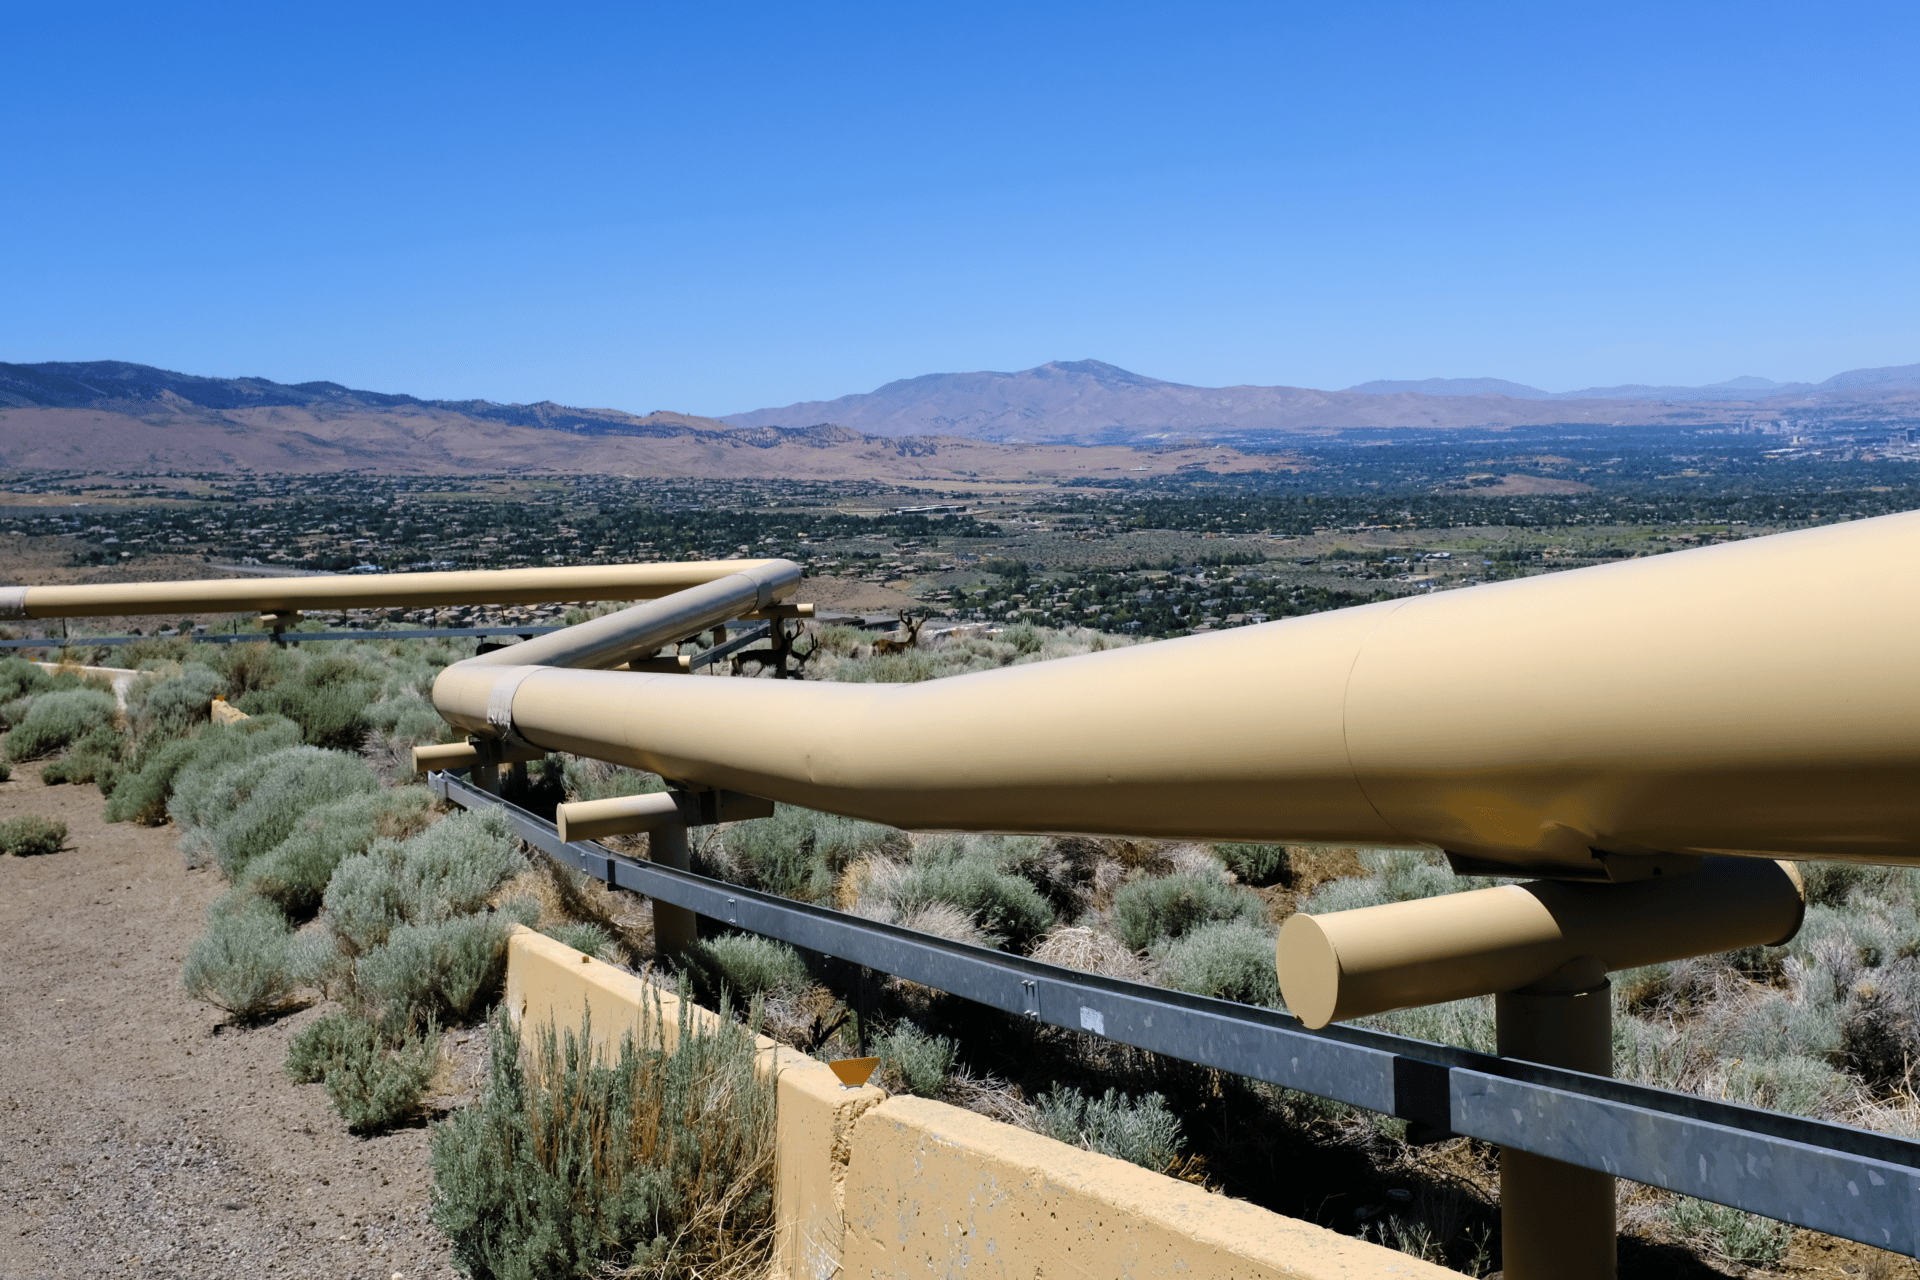 Deer sheltering under a pipe at the Steamboat Hills geothermal complex, with the outskirts of Reno in the distance. (Jessica McKenzie)